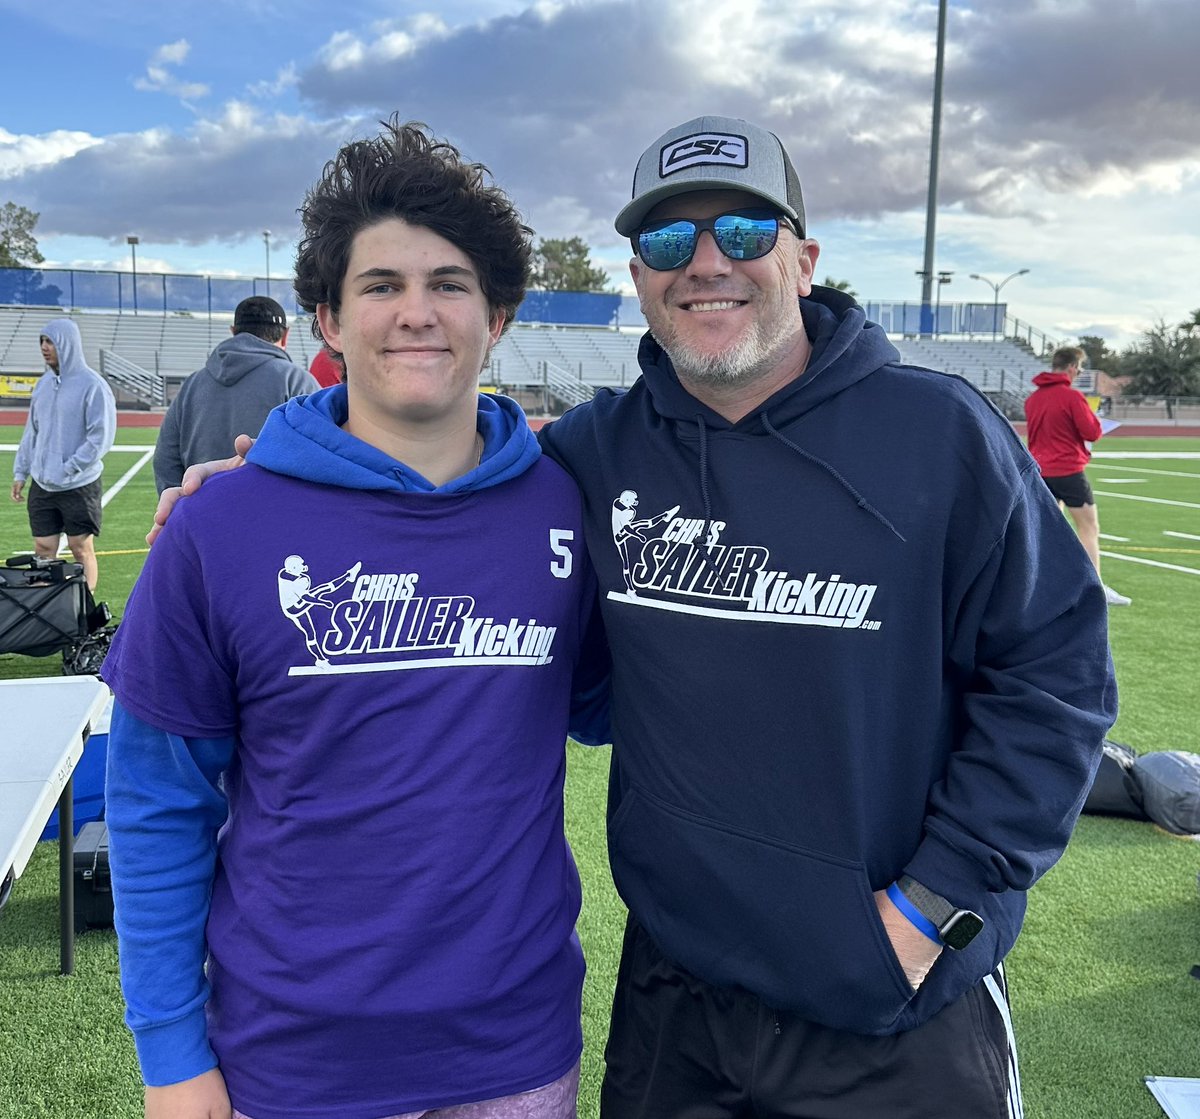 Carter Sobel puts a perfect score of 17 this morning on FG. Can anyone else match him? Beyond impressive performance from the 2027 HS Prospect from Chaminade HS in CA. #TeamSailer